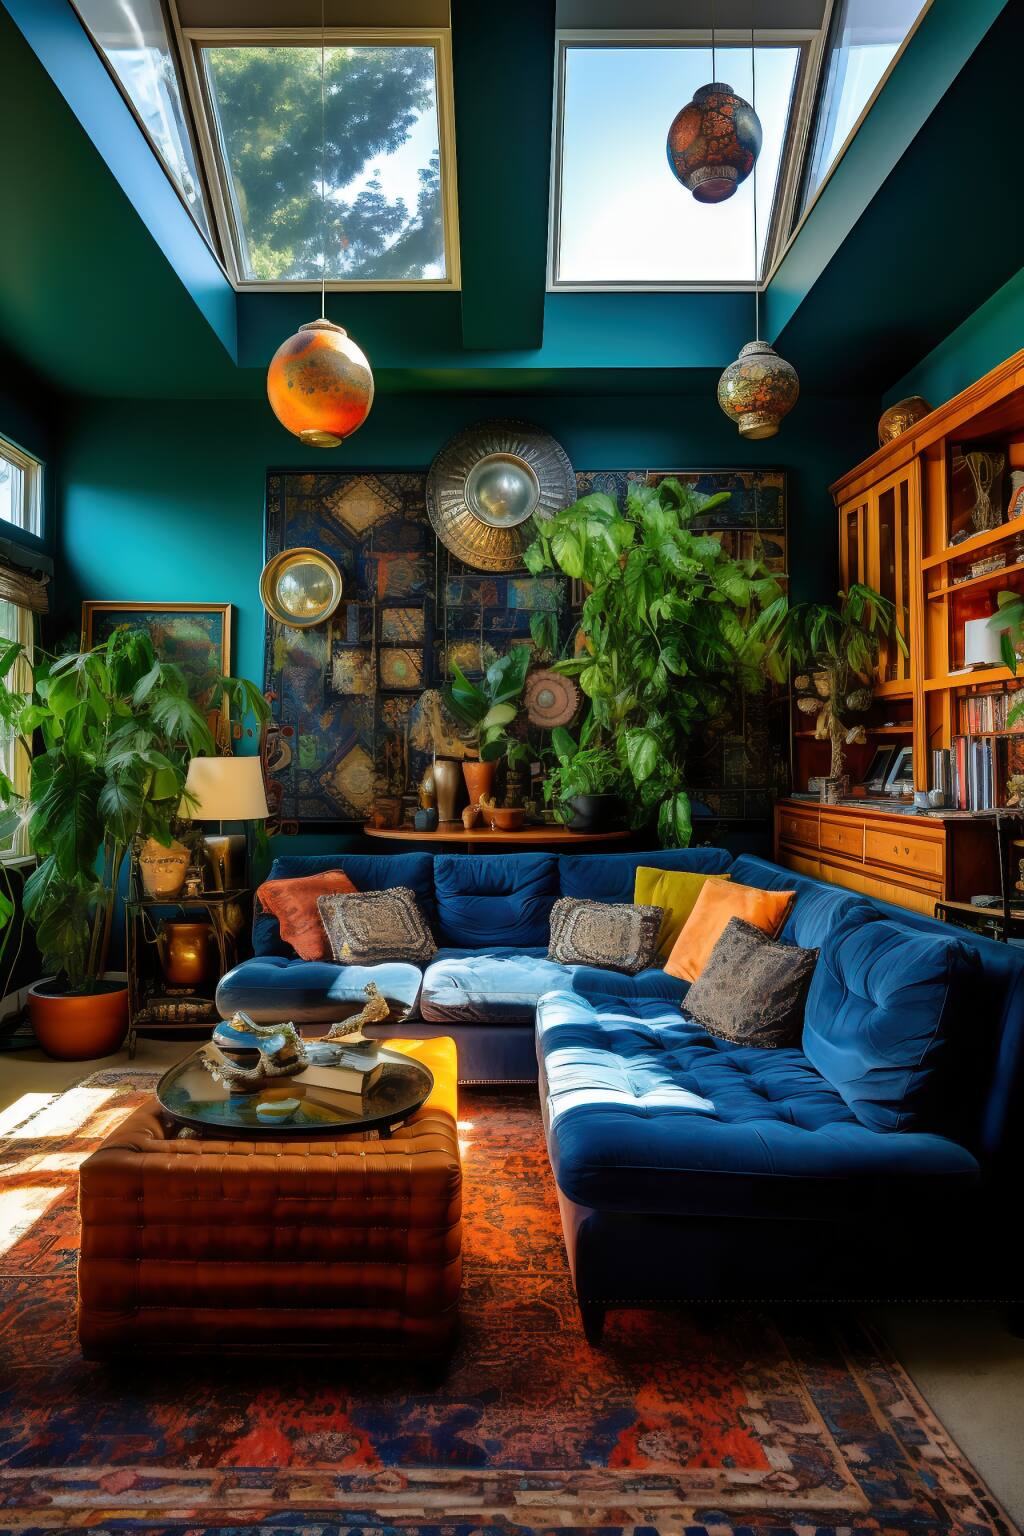 Bohemian Living Room In Blue And Green Shades, Featuring A Velvet Sofa, Vintage Coffee Table, And Hanging Plants.